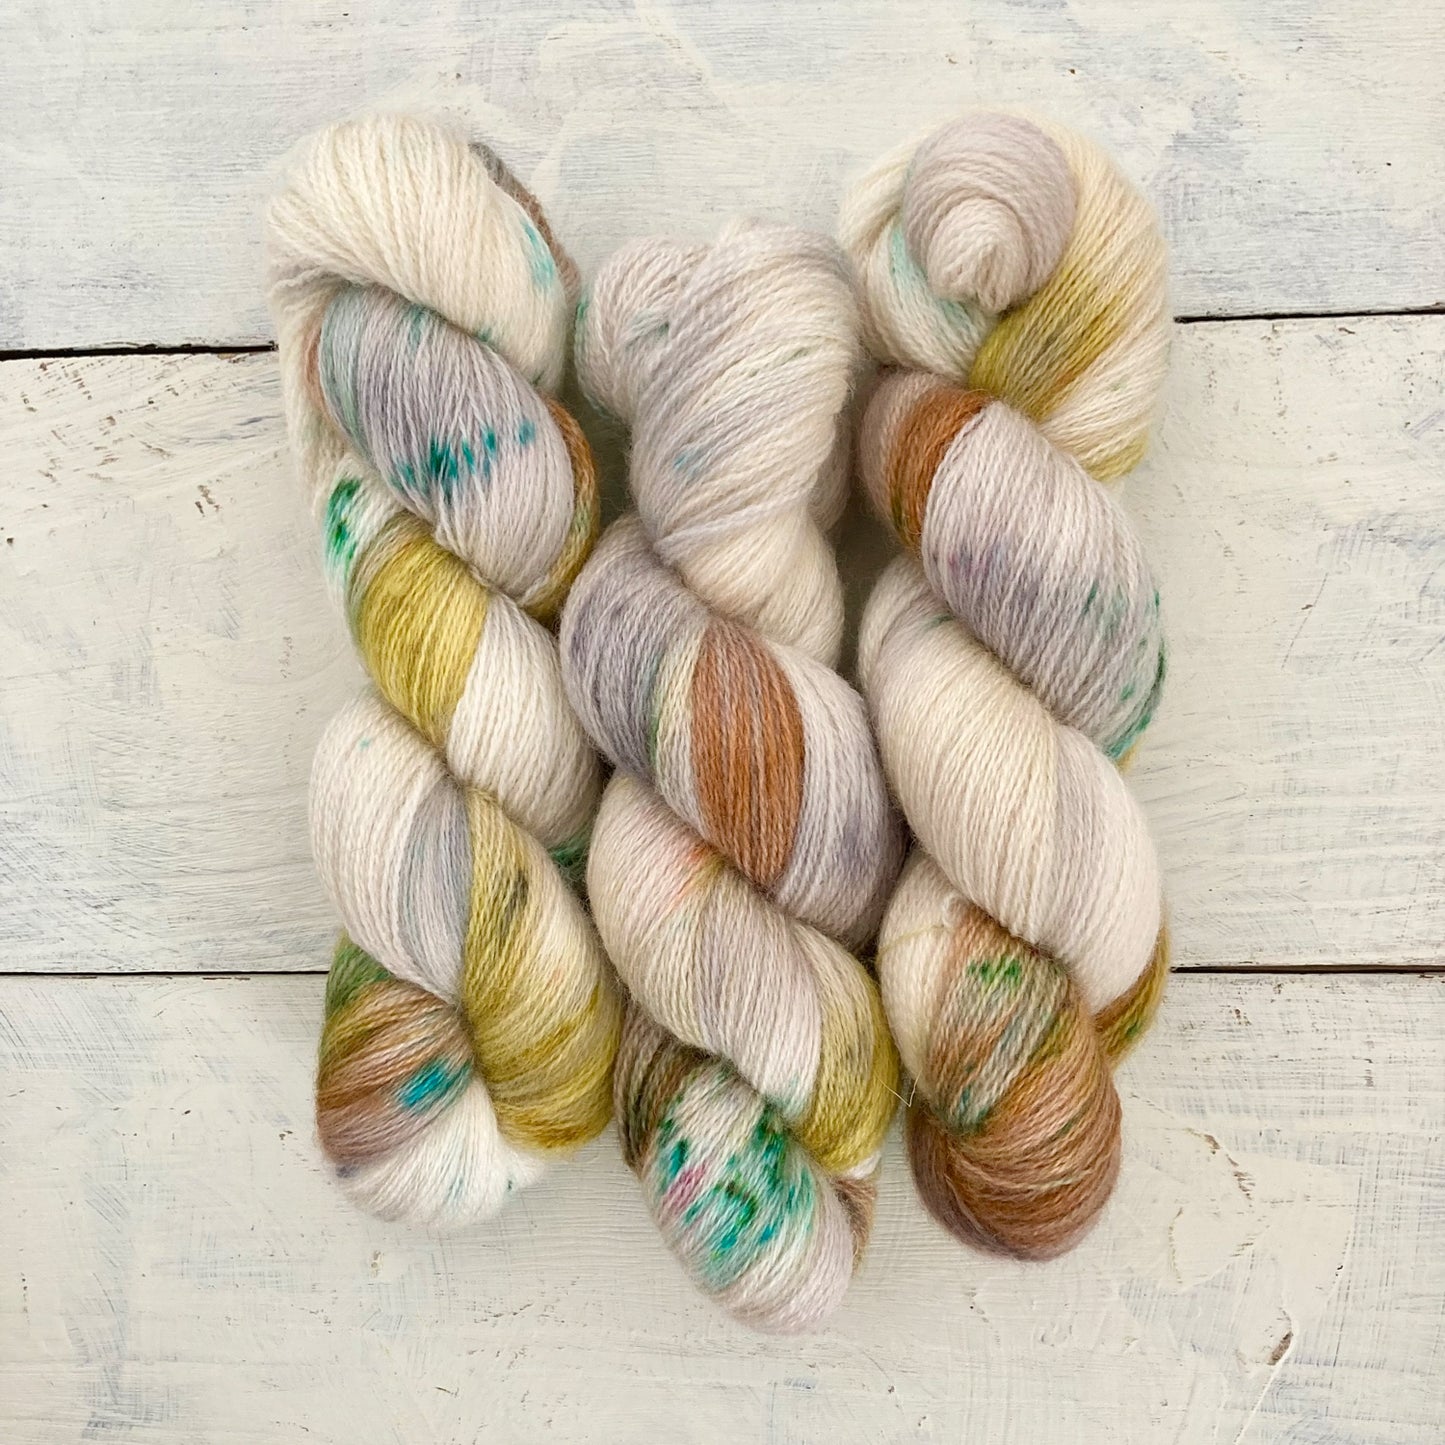 Hand-dyed yarn No.175 BFL lace "Il Cardellino"